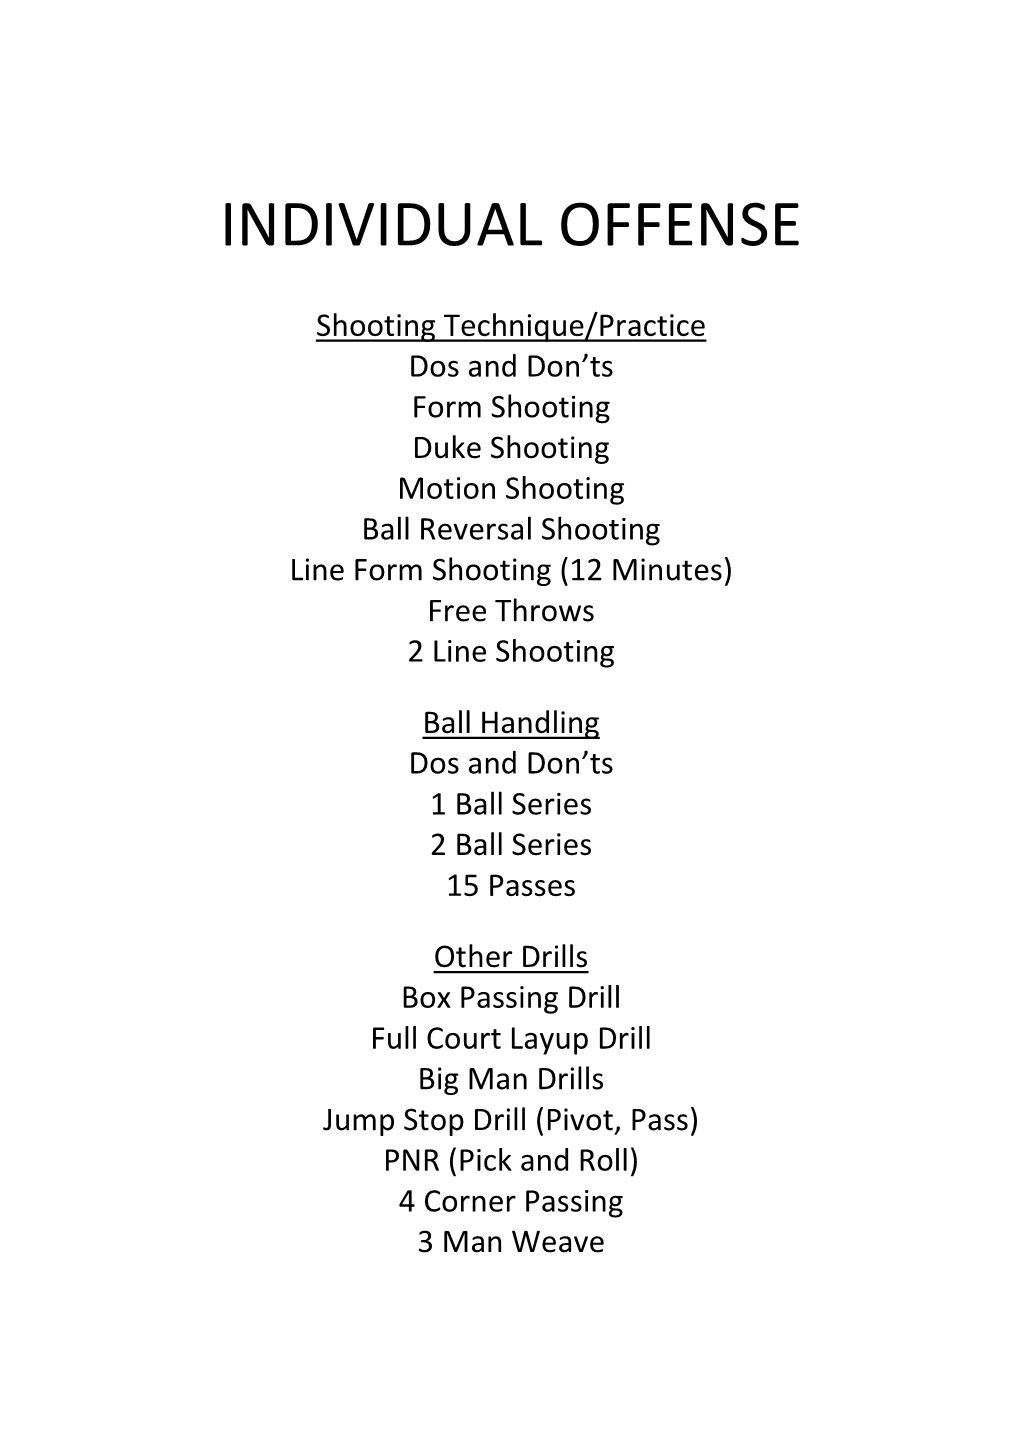 5. Individual Offense